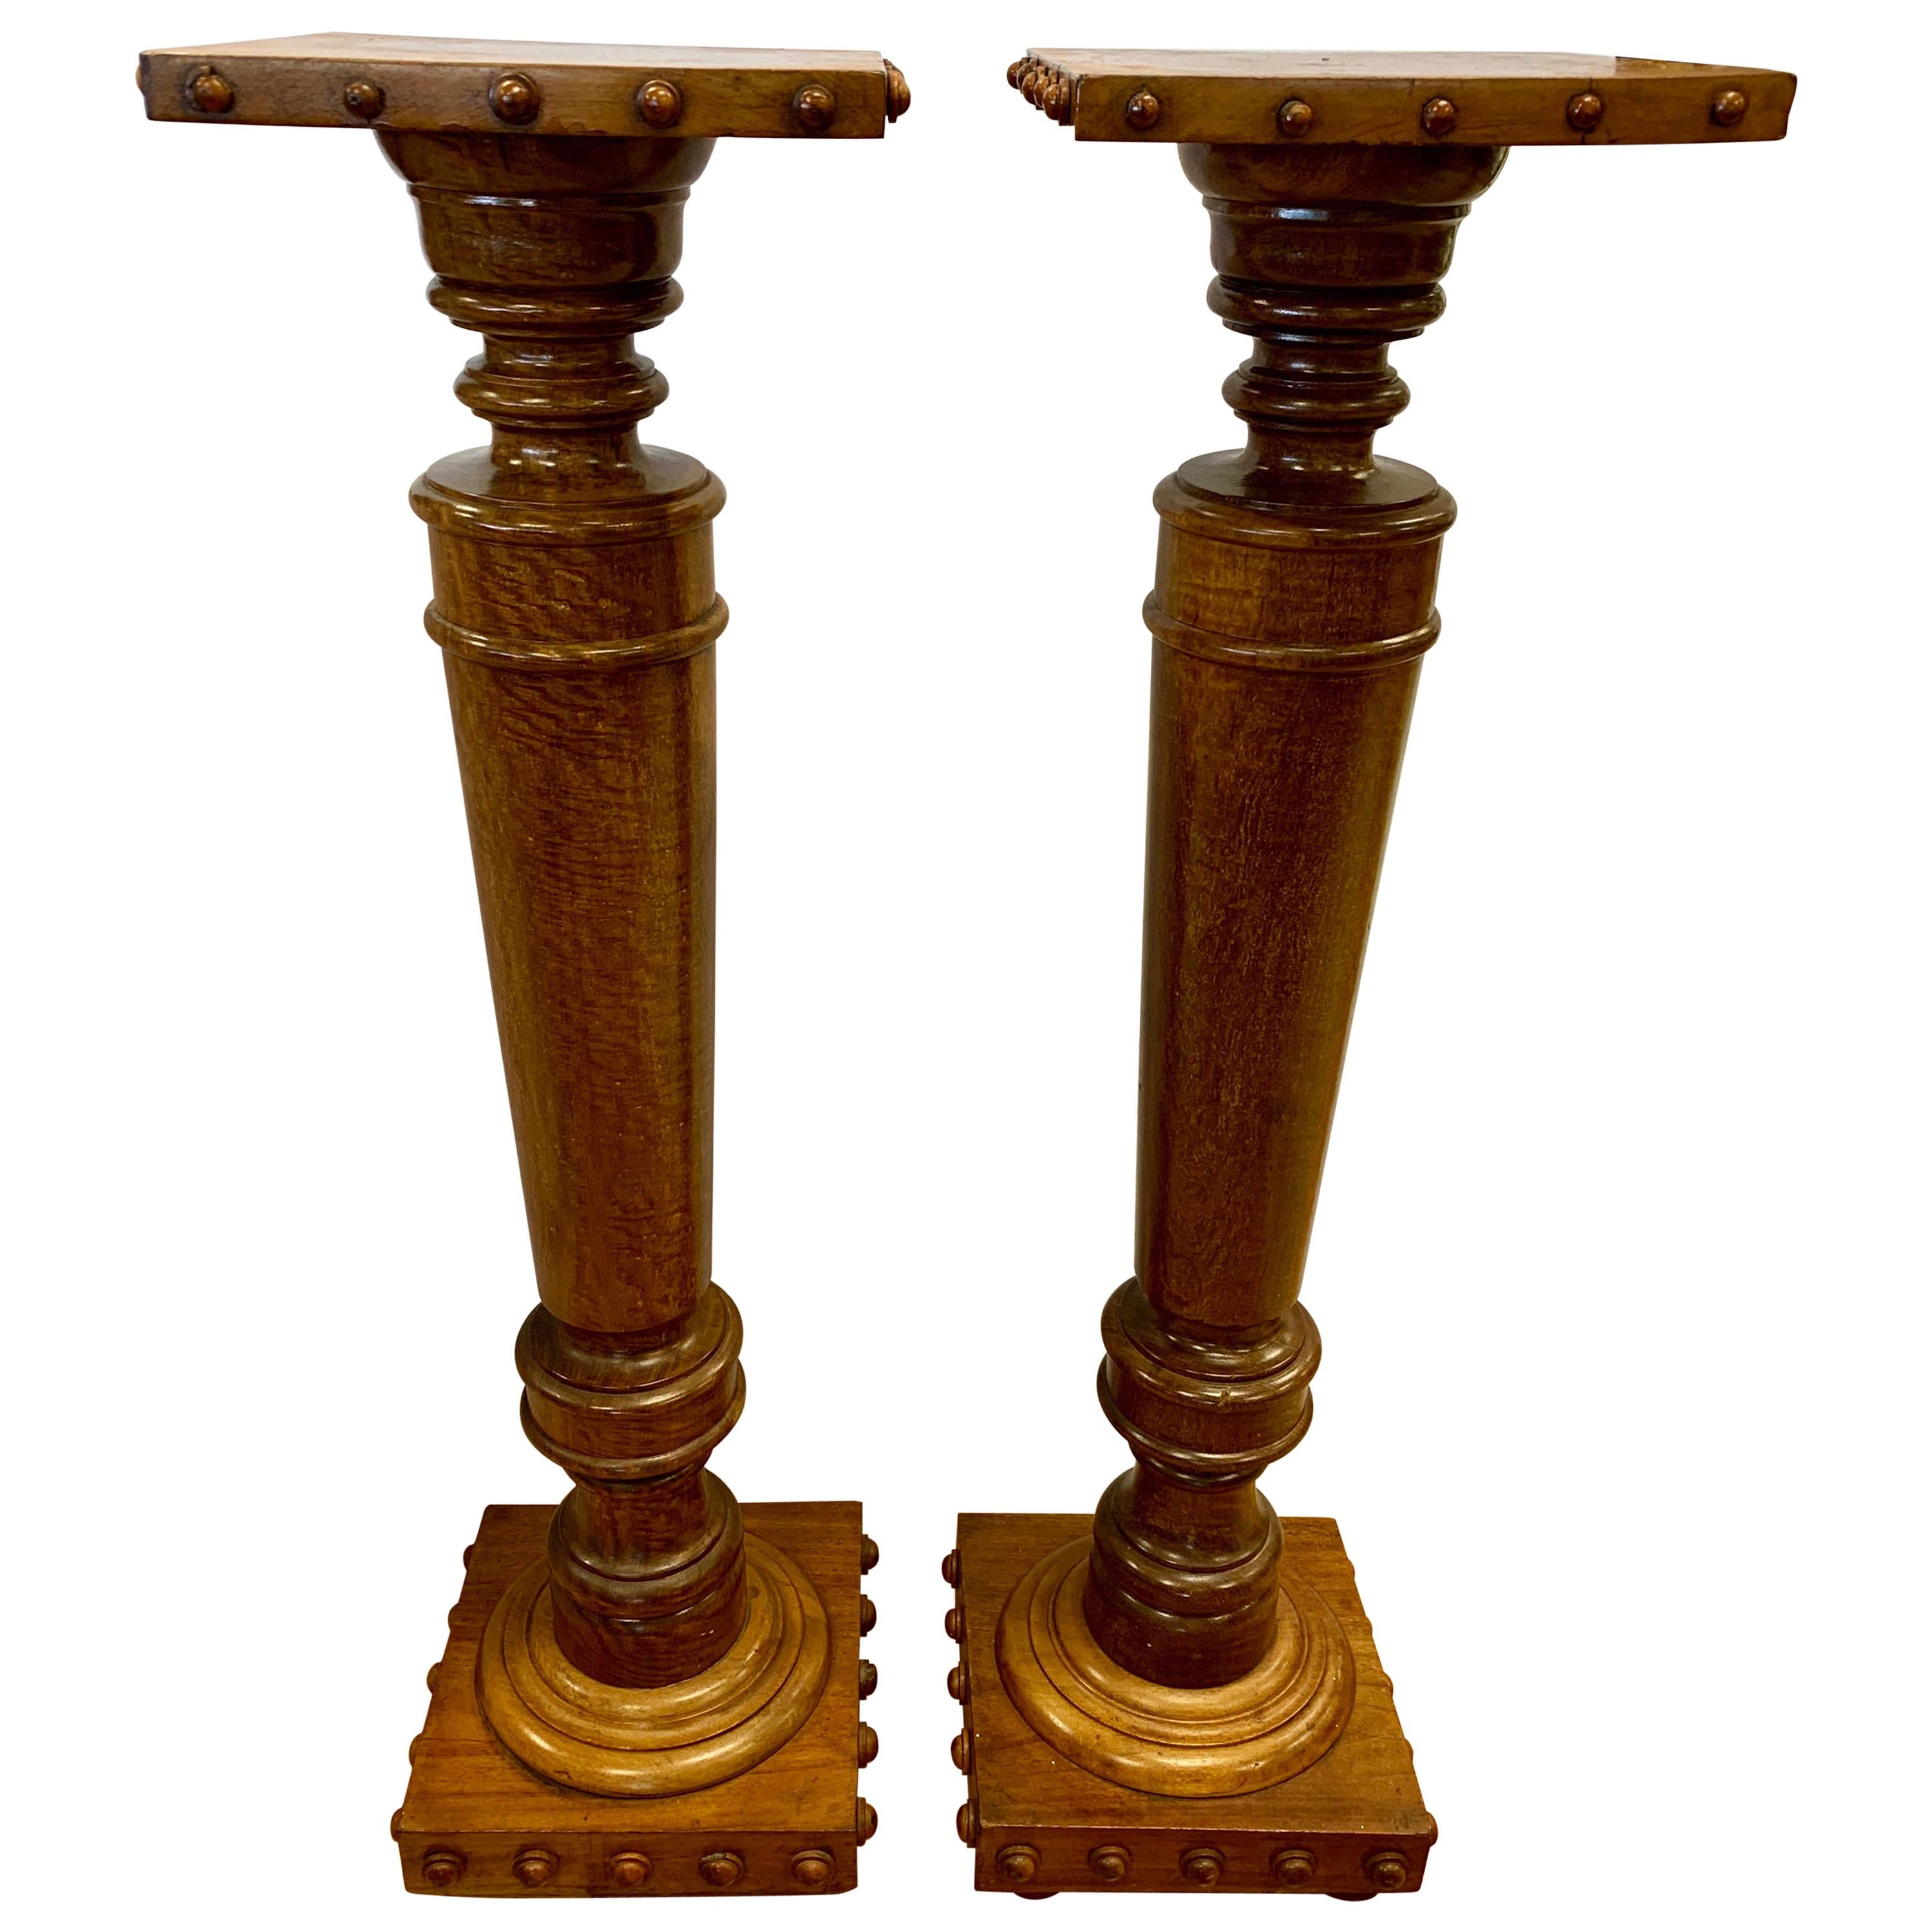 Pair of Regency Style Mahogany Column Pedestals Square Top Carved Accents